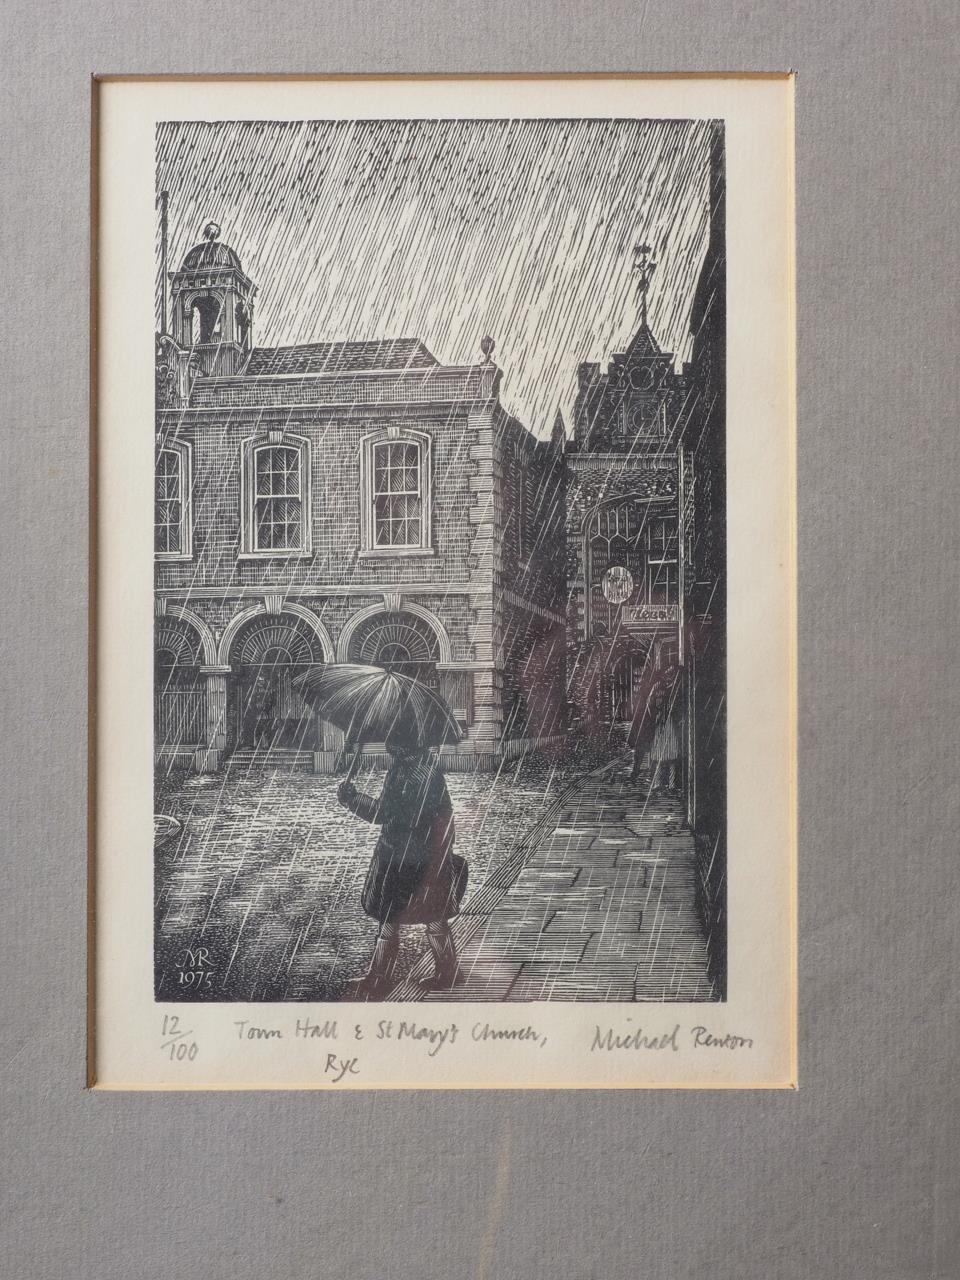 Michael Renton: a limited edition print, "Town Hall & St Mary's Church, Rye", 12 /100, in wooden